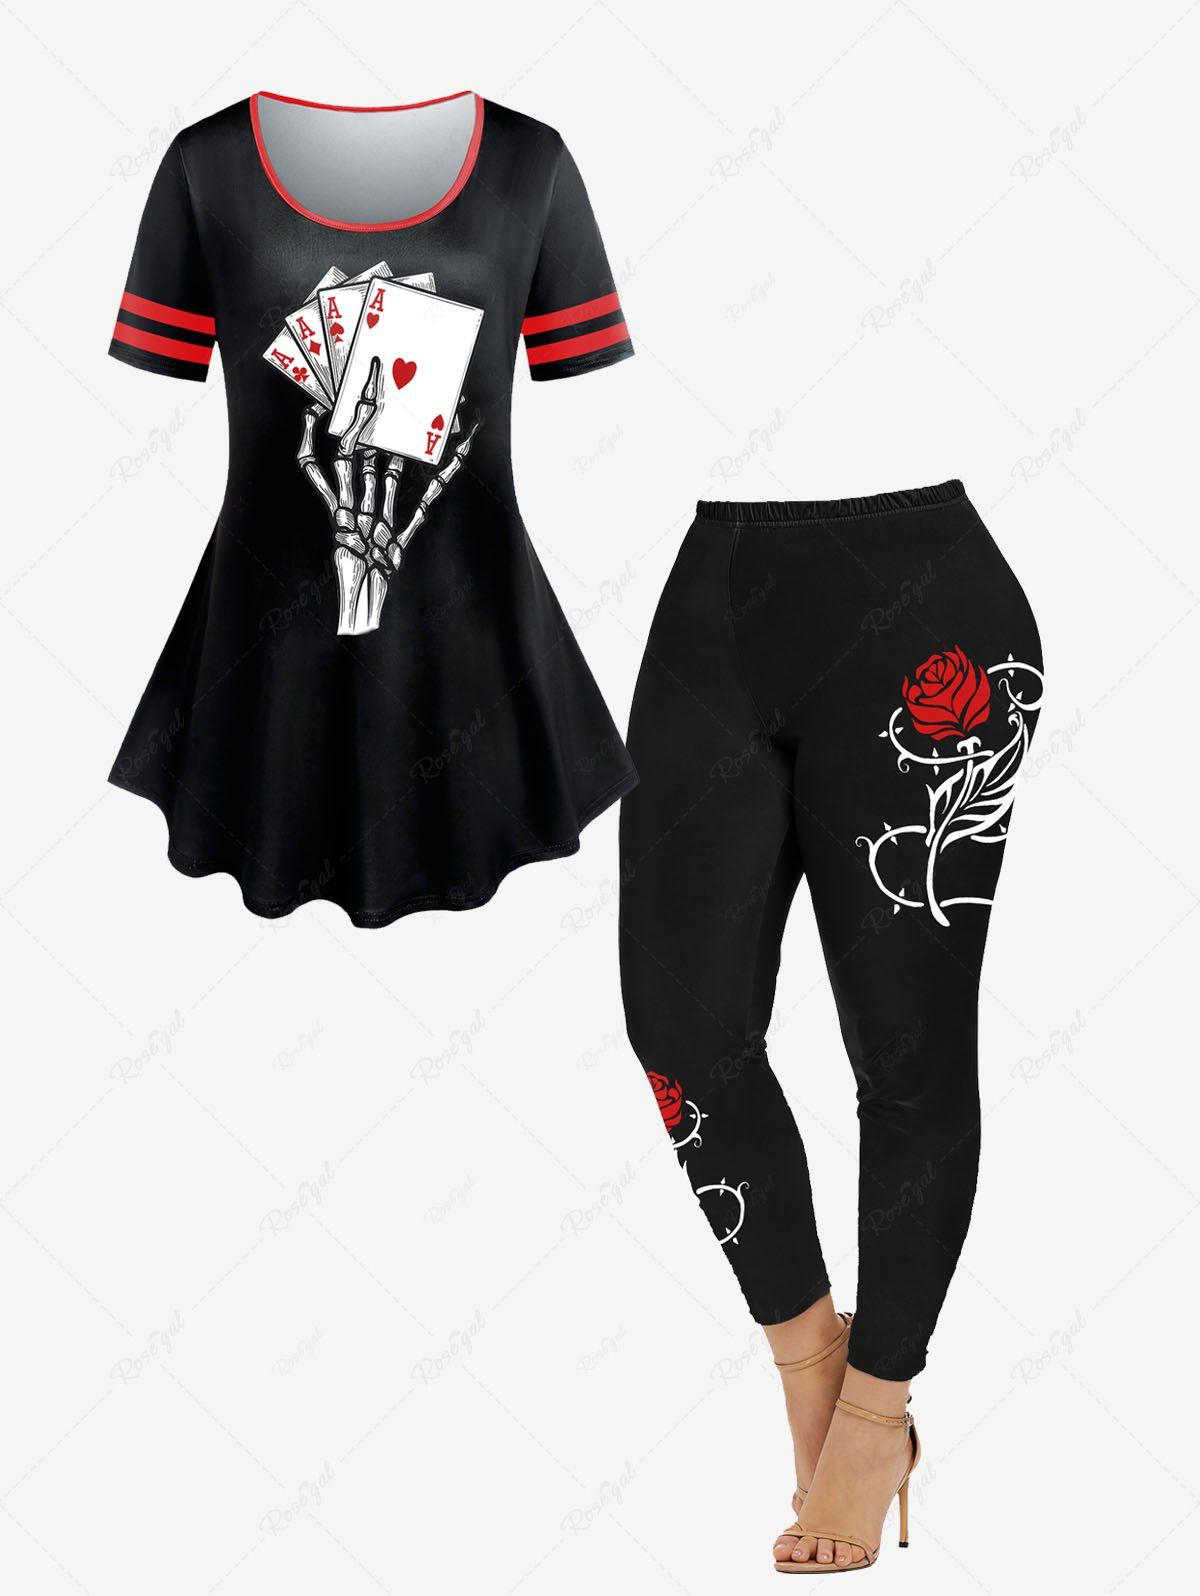 Shop Skeleton Playing Card Printed Gothic Tee and High Rise Rose Print Skinny Leggings Plus Size Outfit  